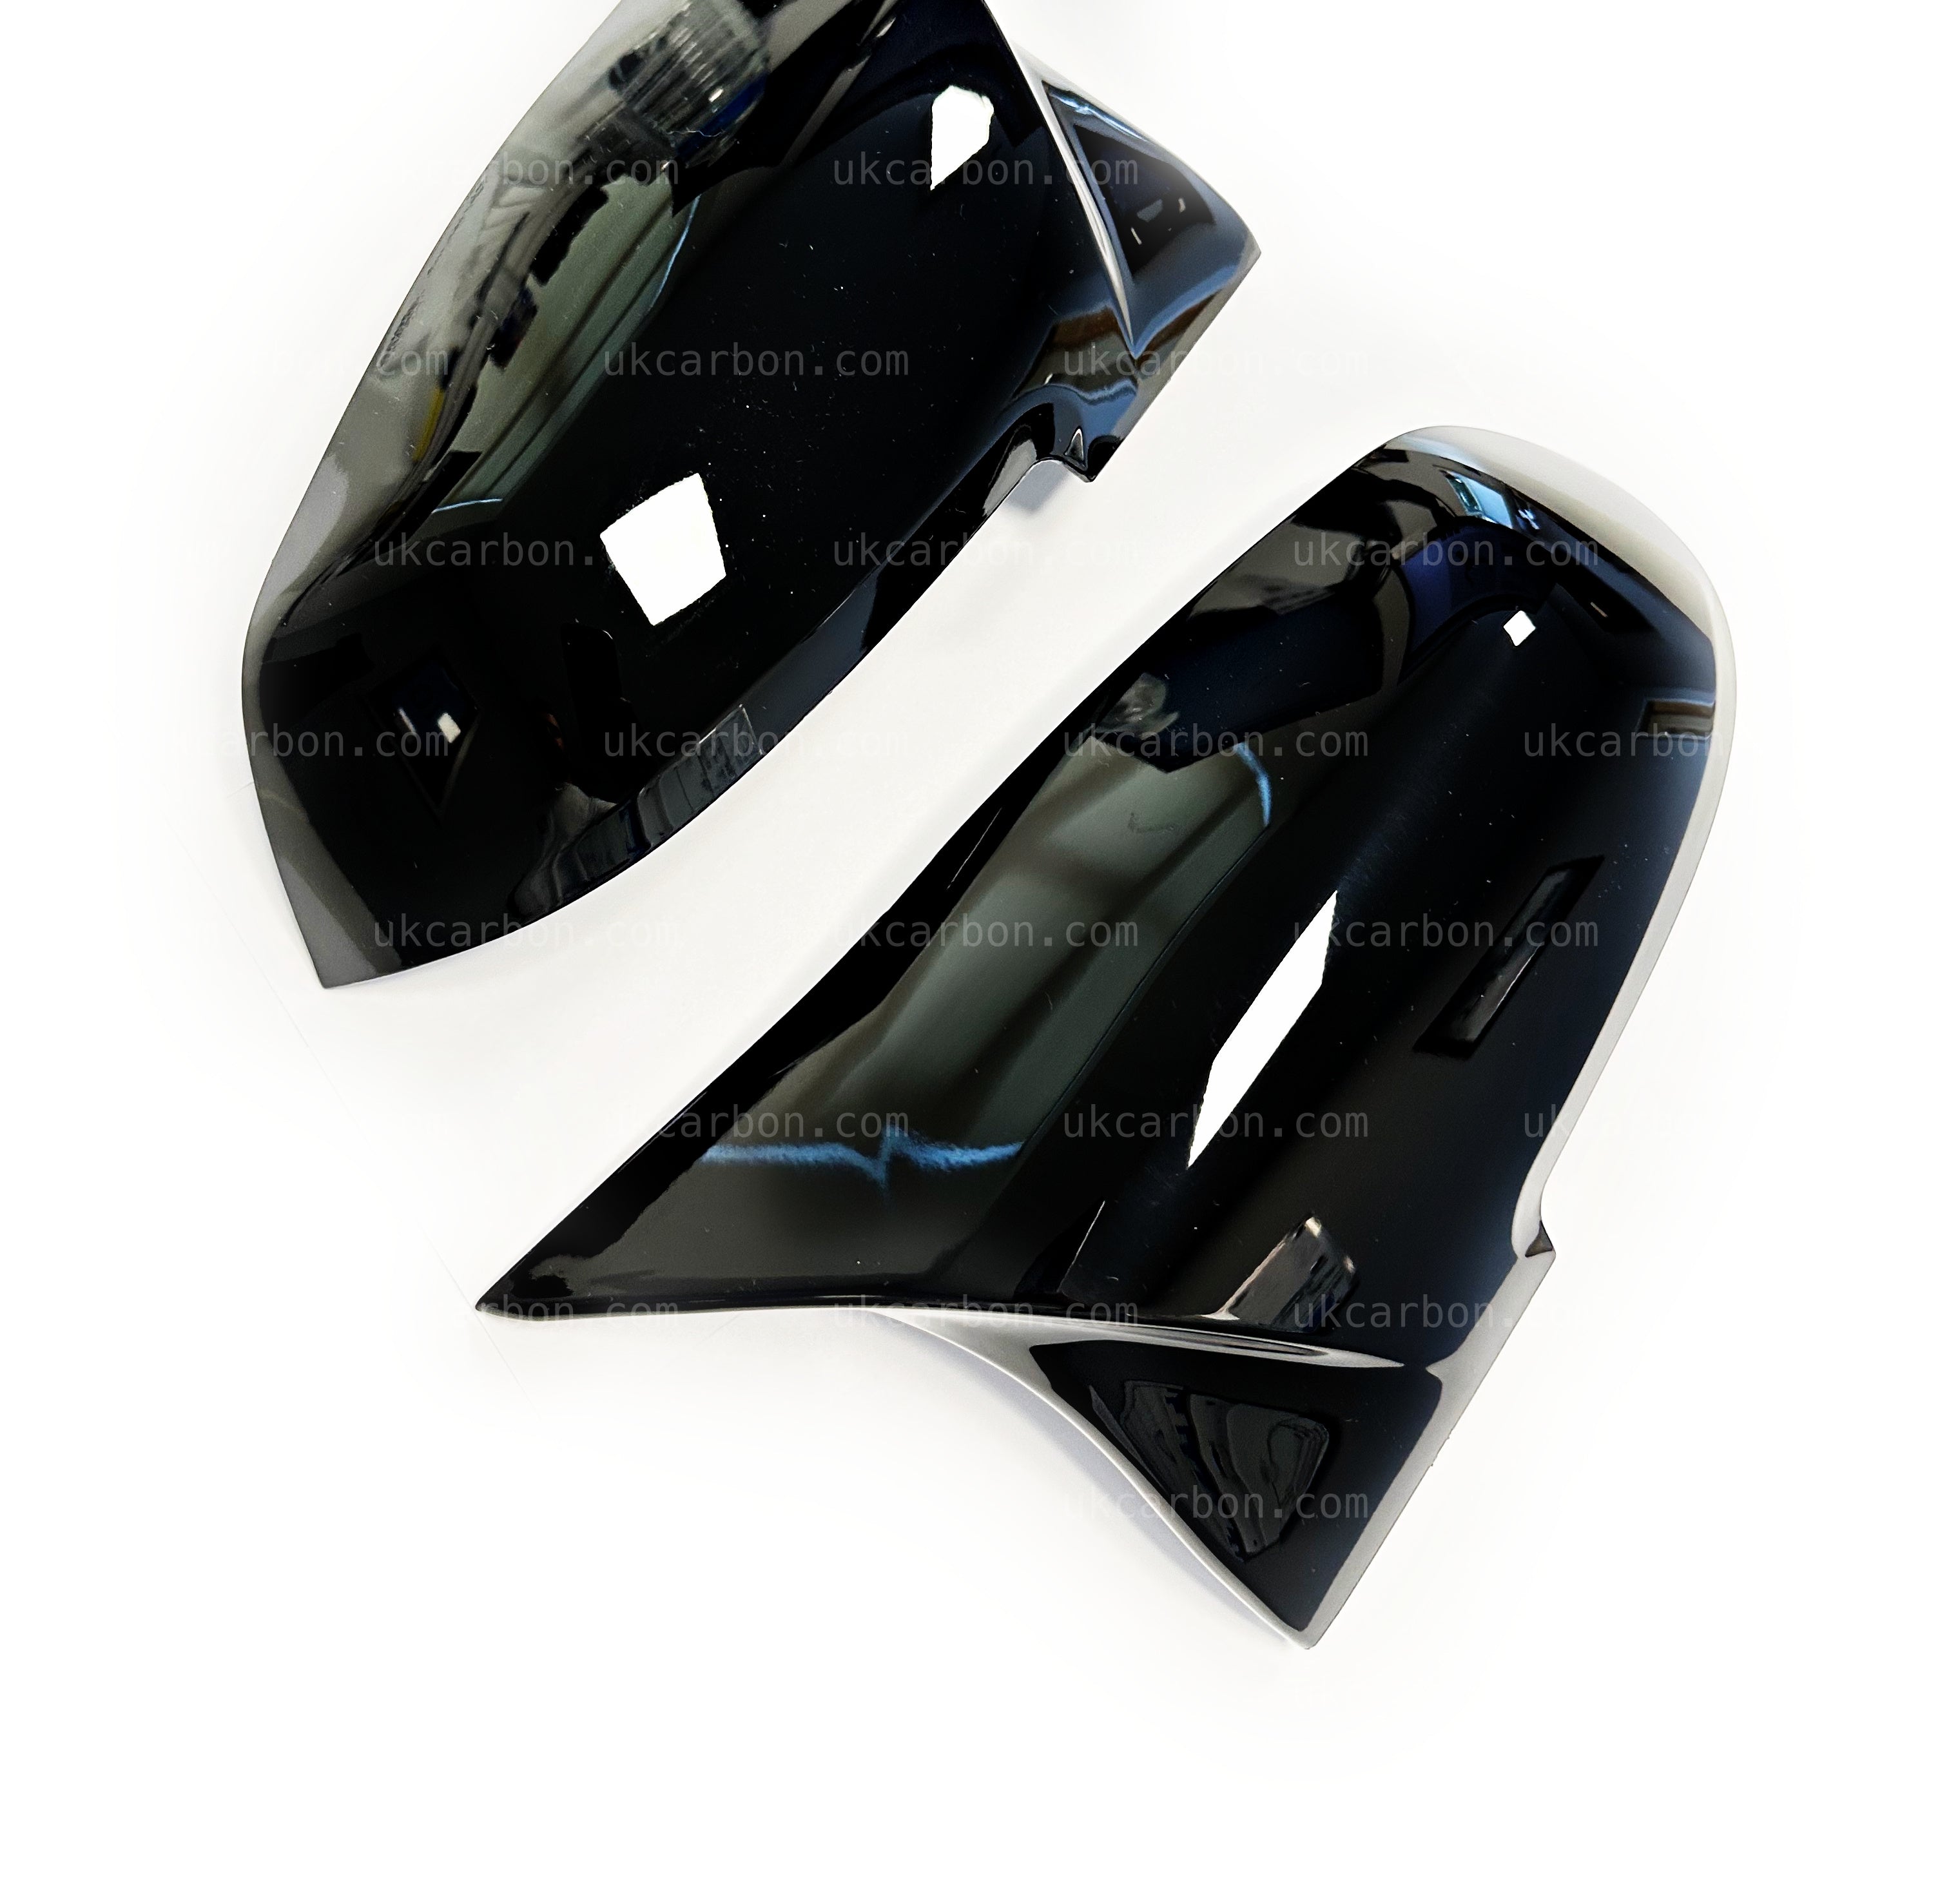 BMW 4 Series Gloss Black M Style Wing Mirror Cover Replacements F32 by UKCarbon